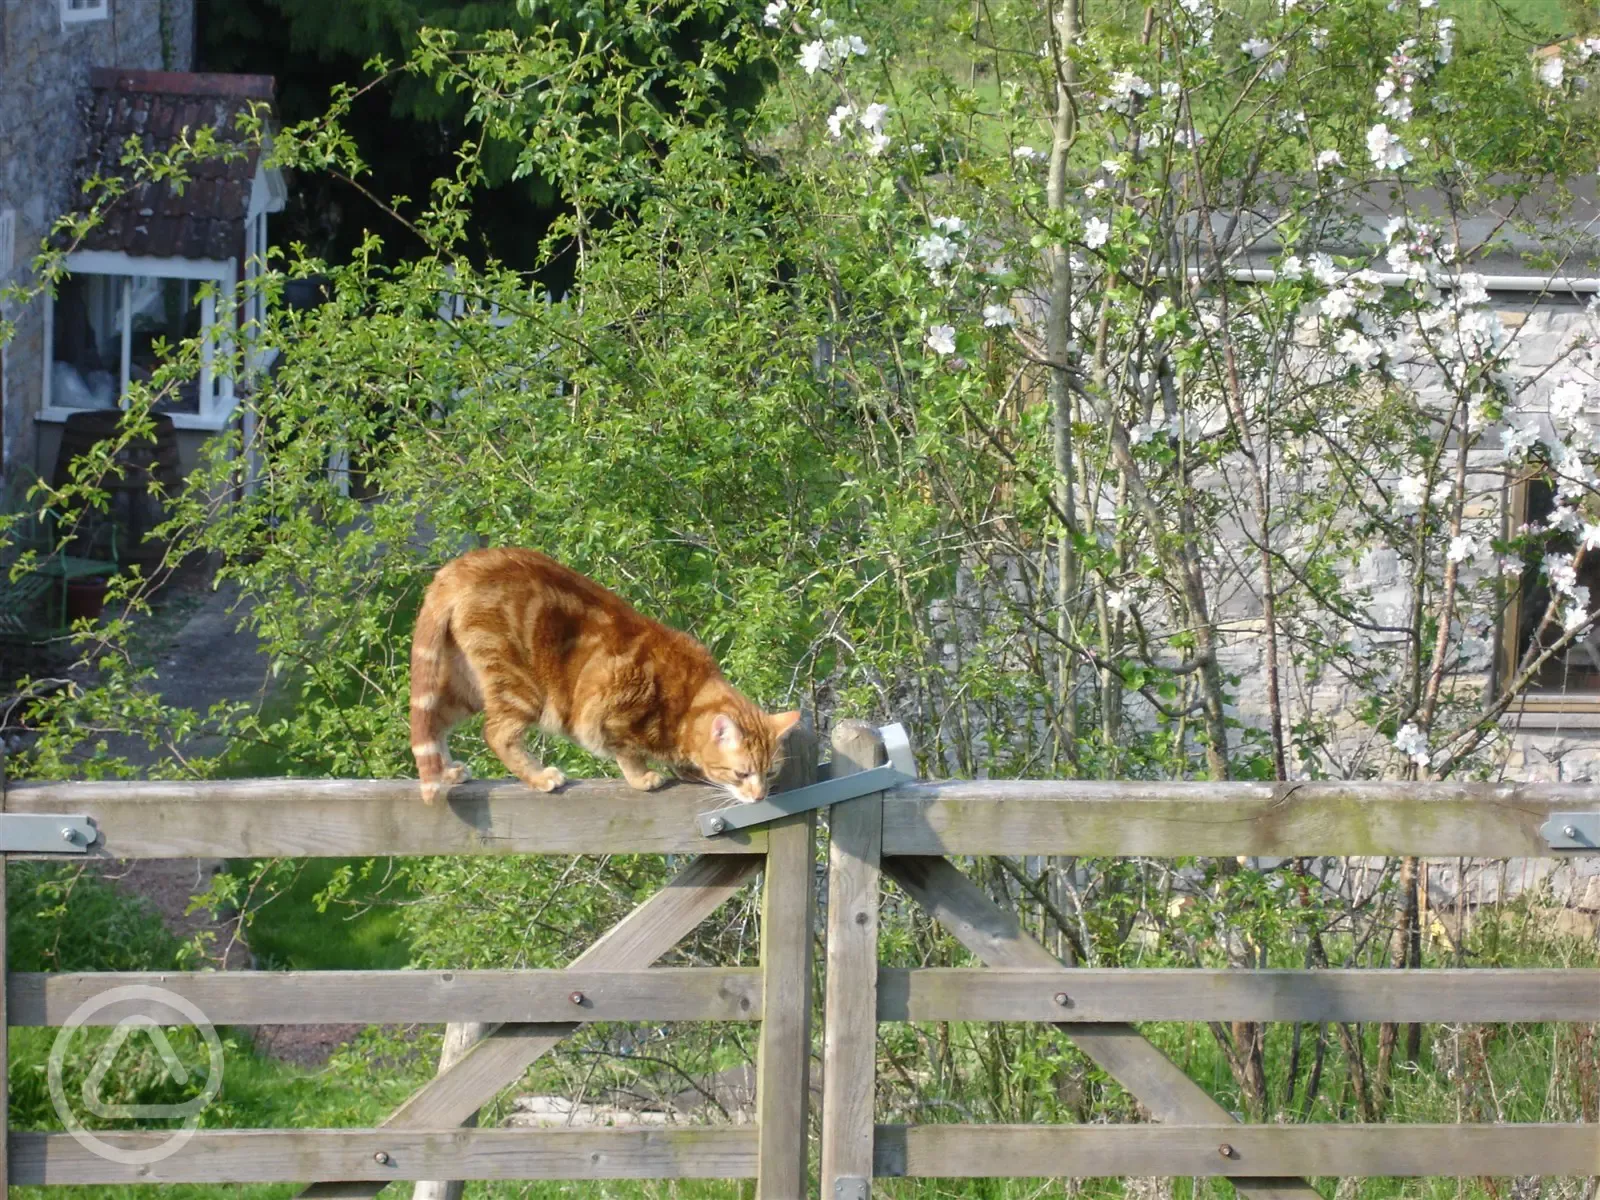 a welcome to the Orchard from Spooks our cat!